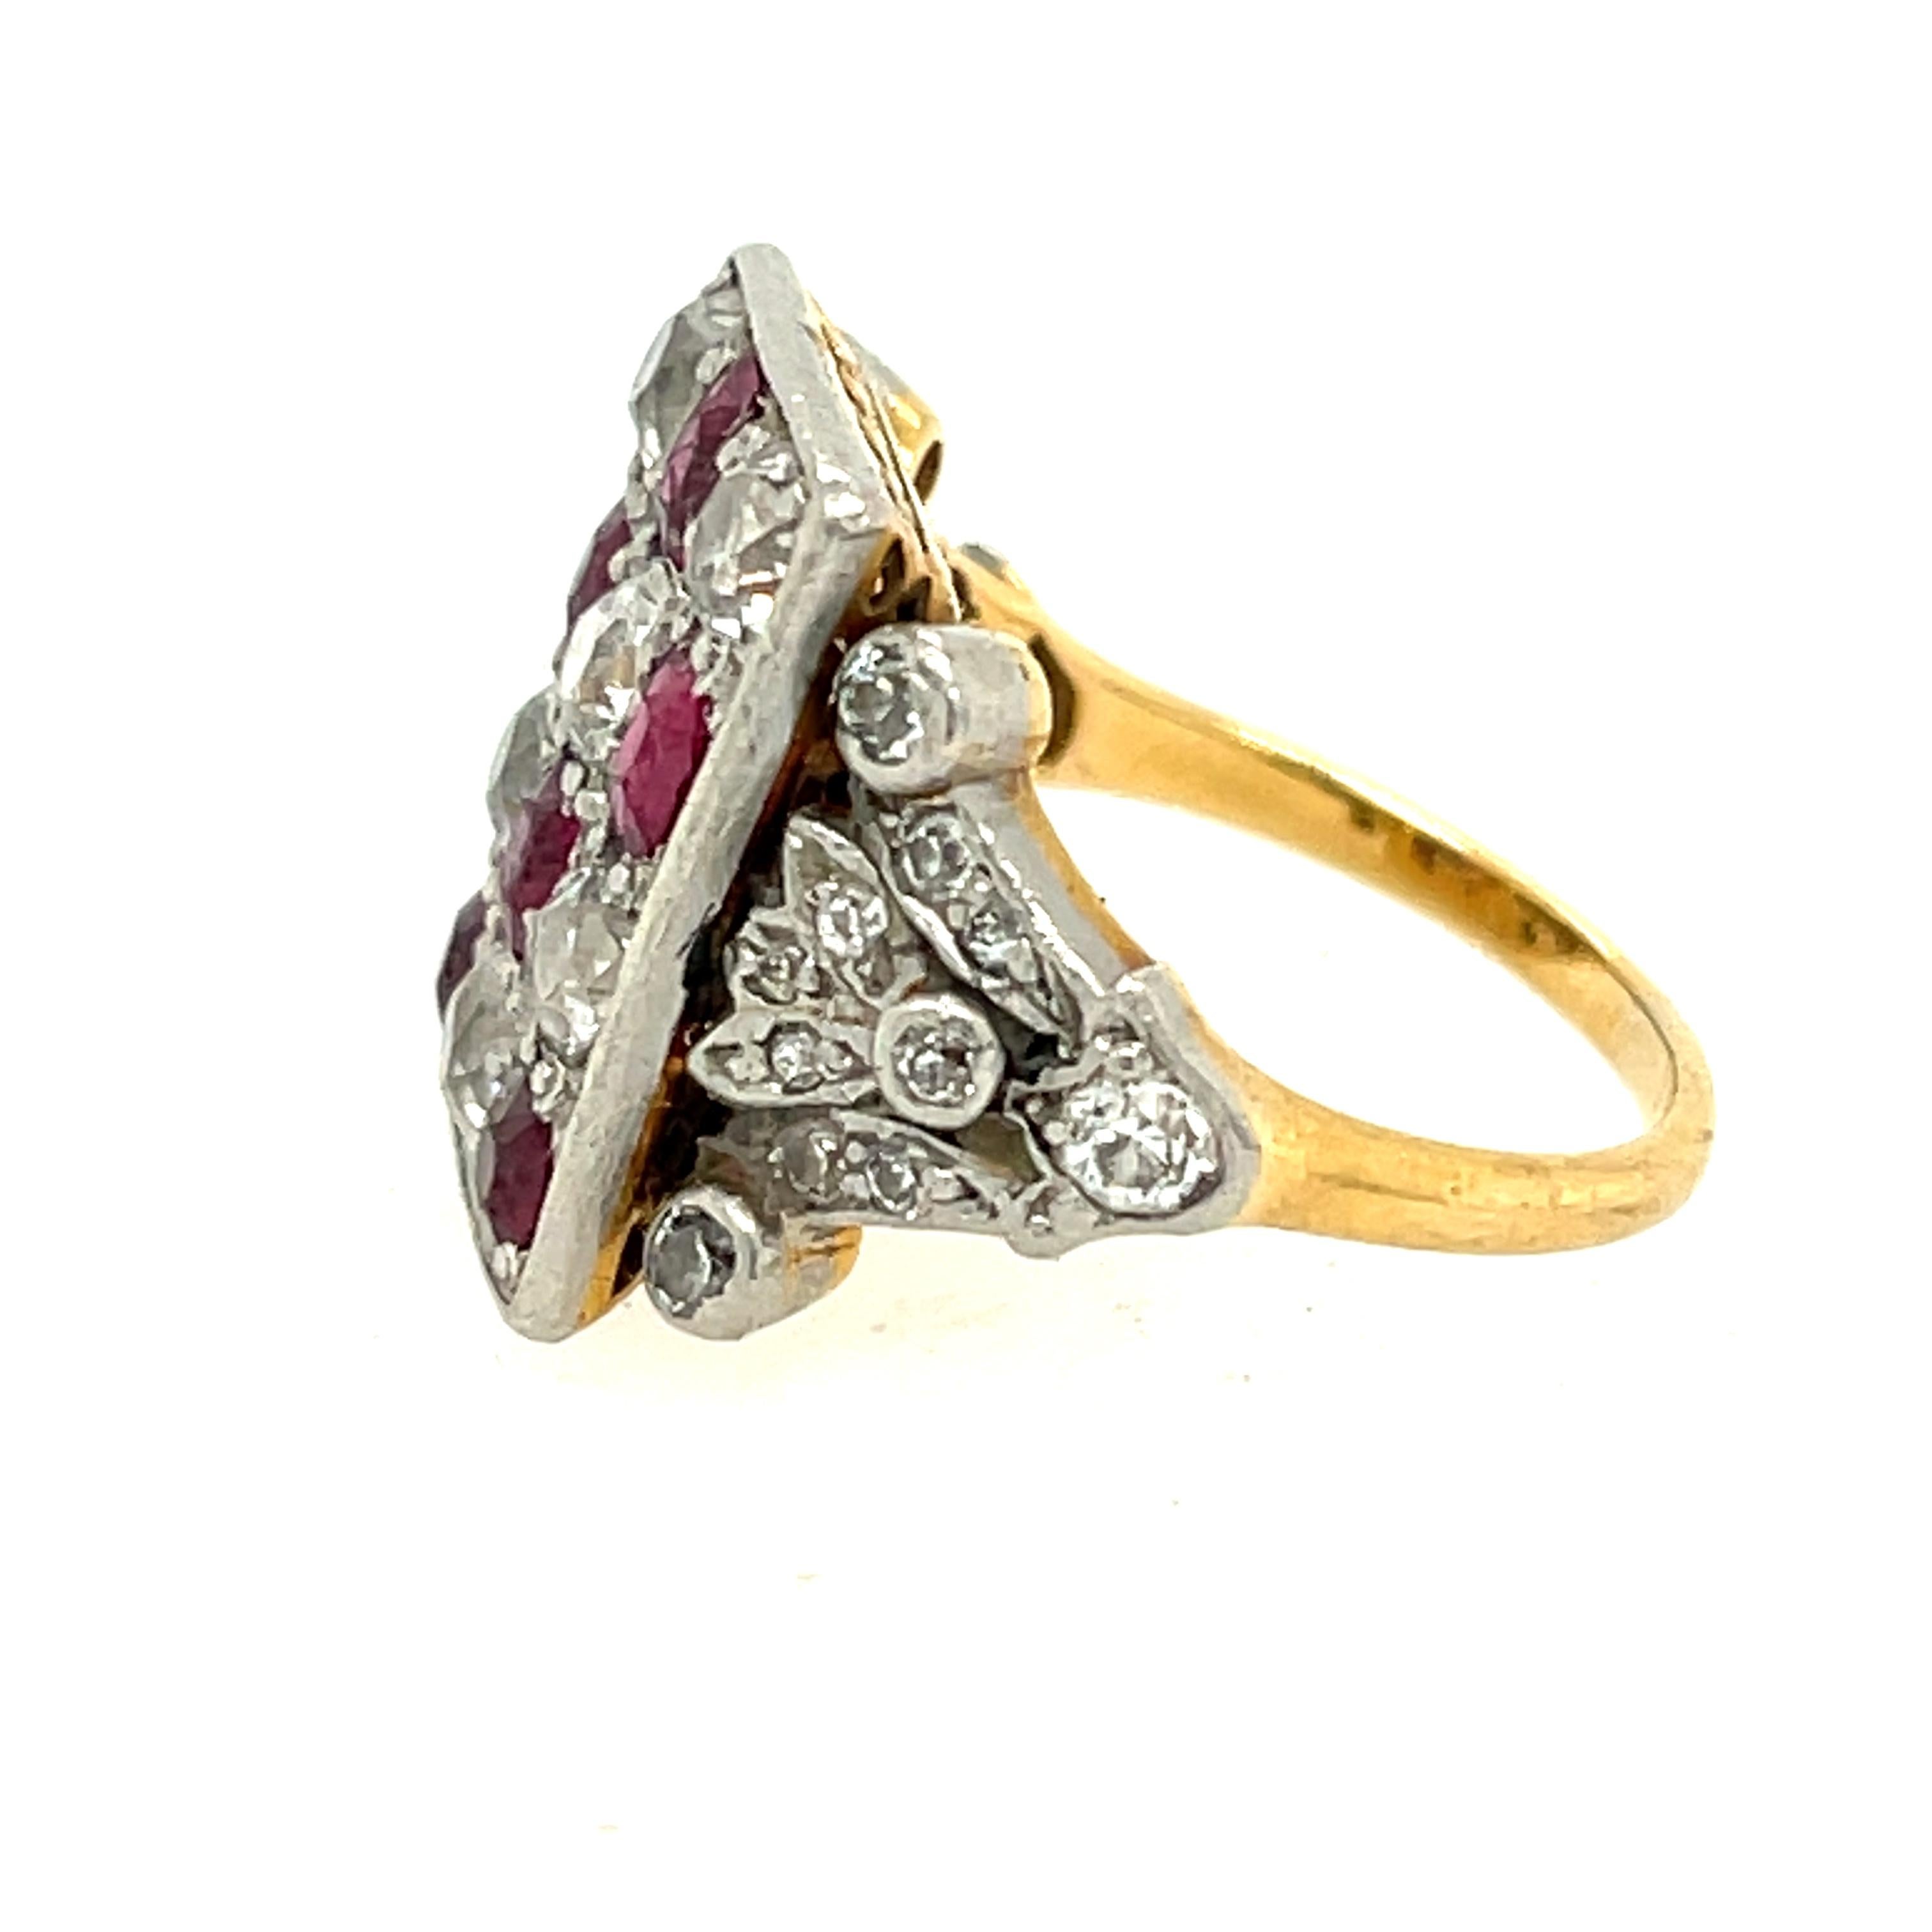 Antique Edwardian platinum topped 18k yellow gold diamond ruby ring, circa 1900.  This unique ring features a checkerboard pattern of alternating rubies and diamonds, with diamond along the side of the ring. The diamond 26 old mine cut diamonds